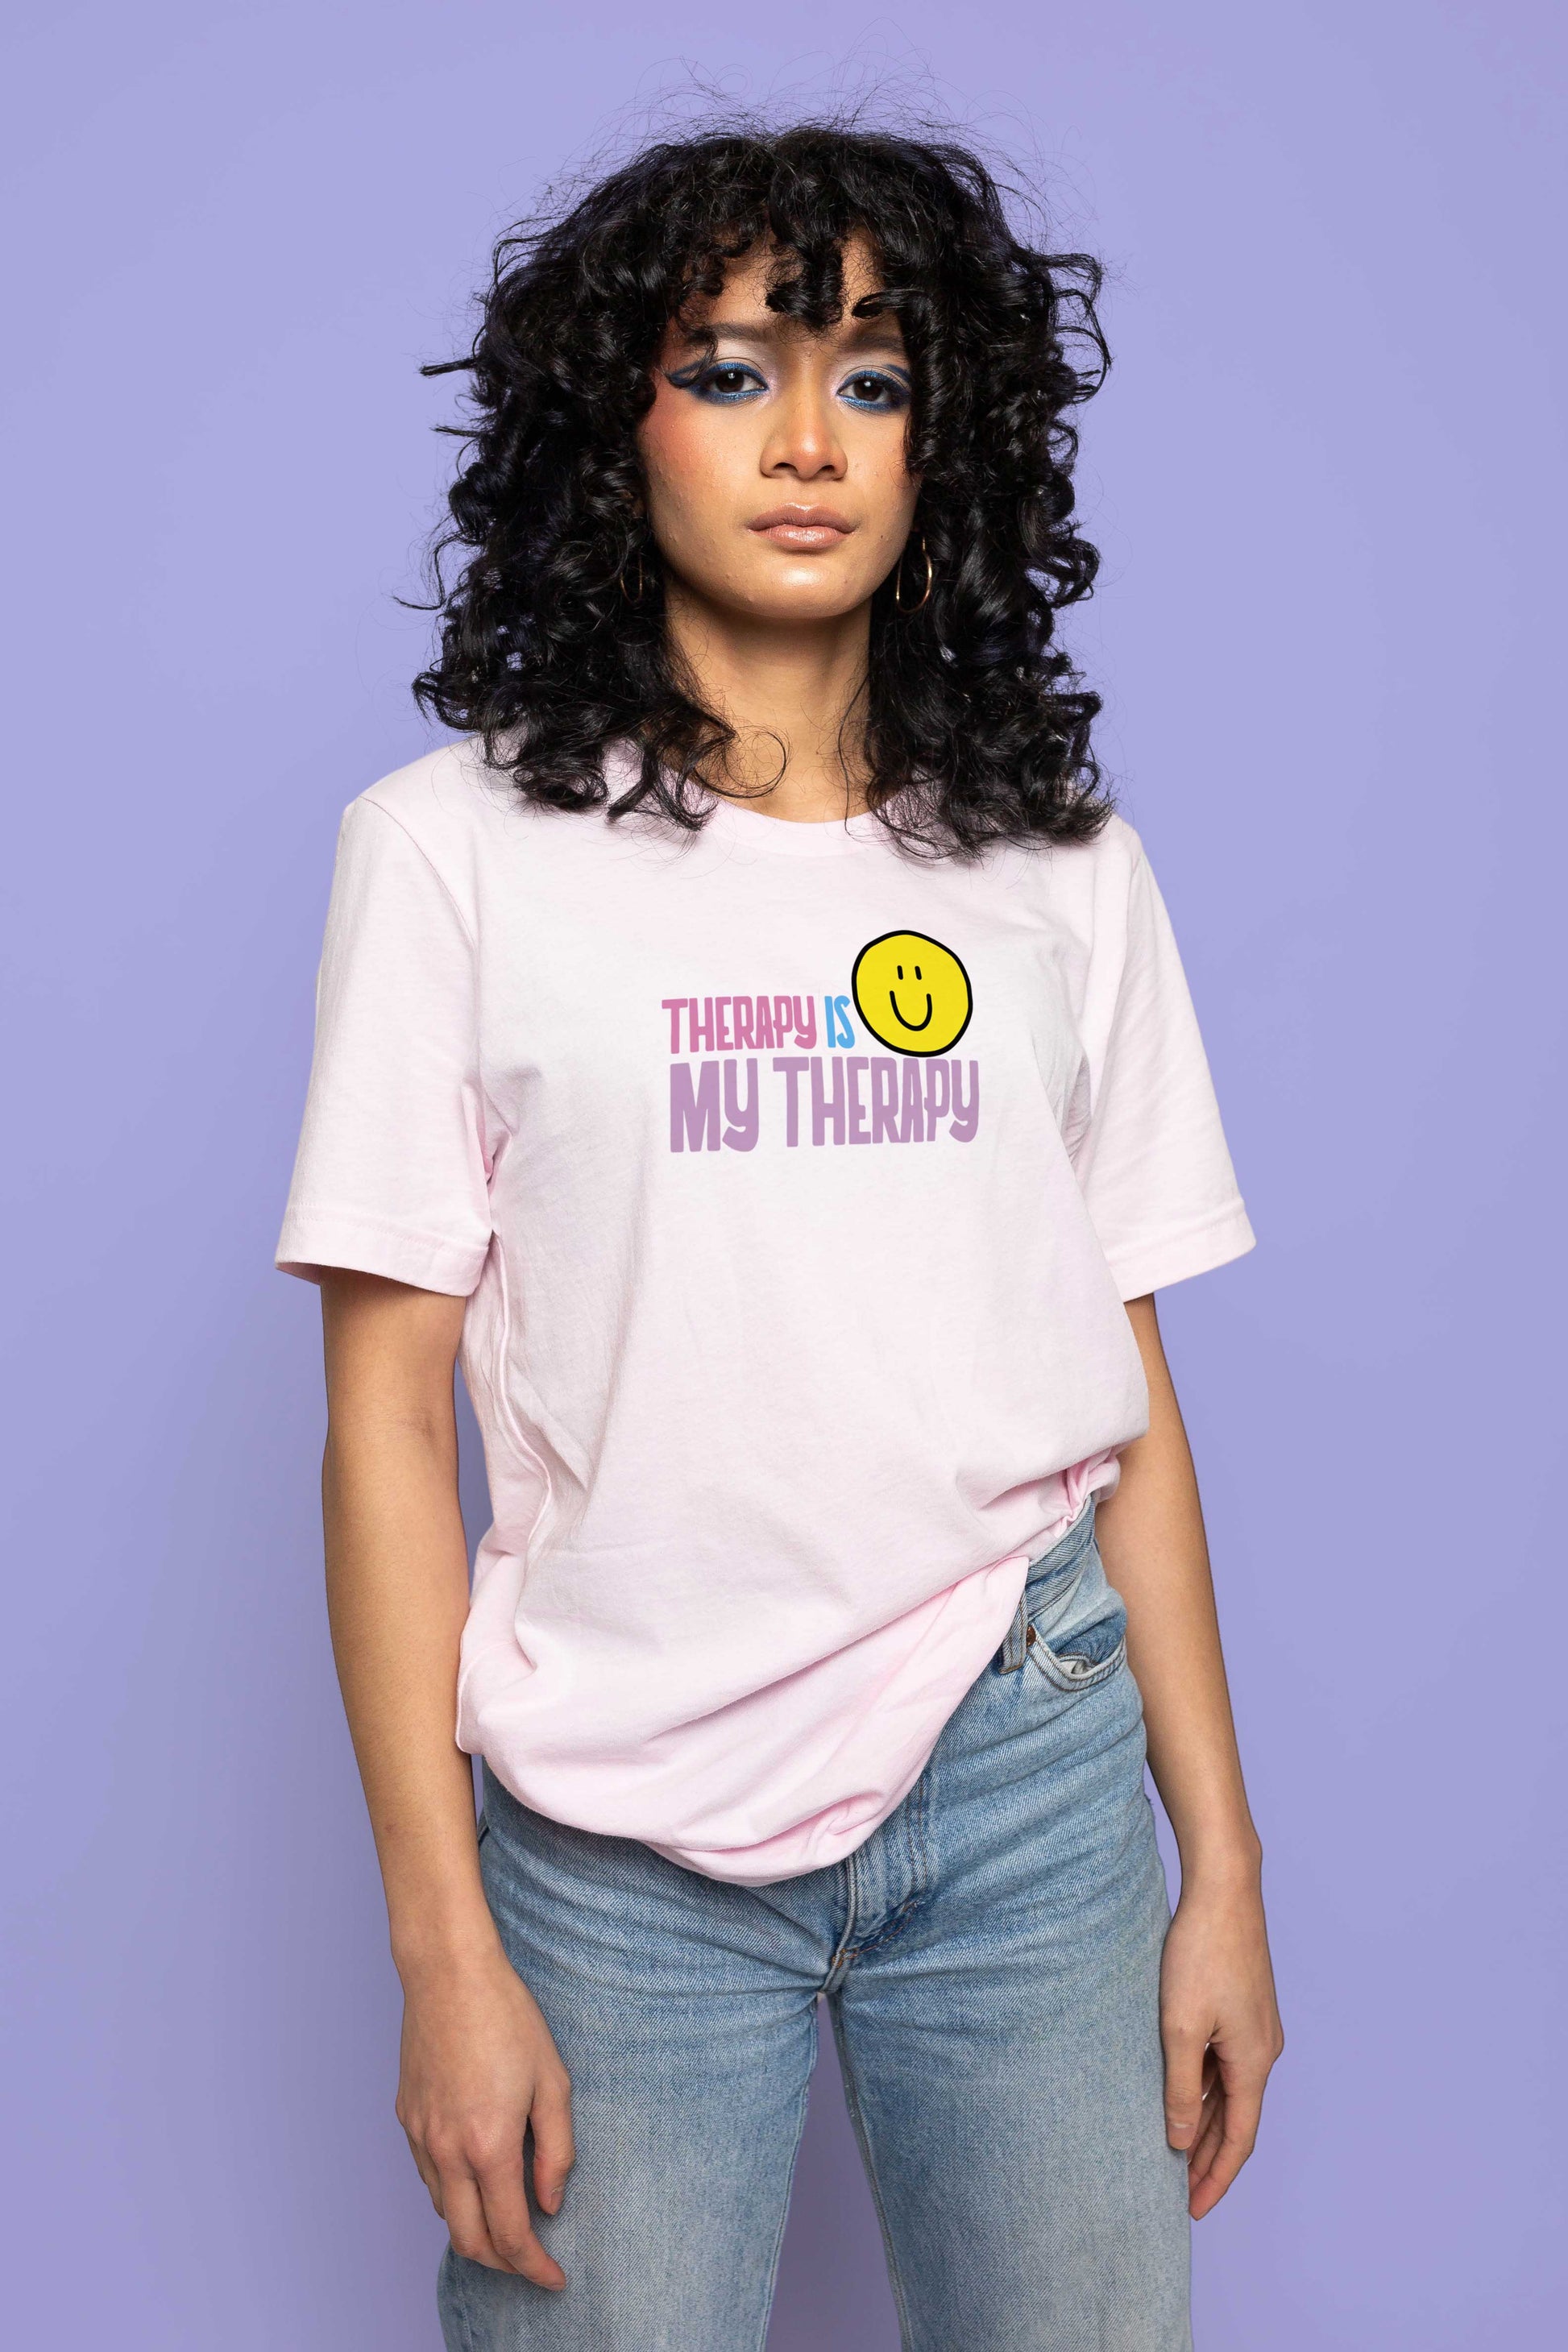 This is The Remix T-shirt THERAPY IS MY THERAPY - Unisex Soft Pink Crew Neck T-Shirt